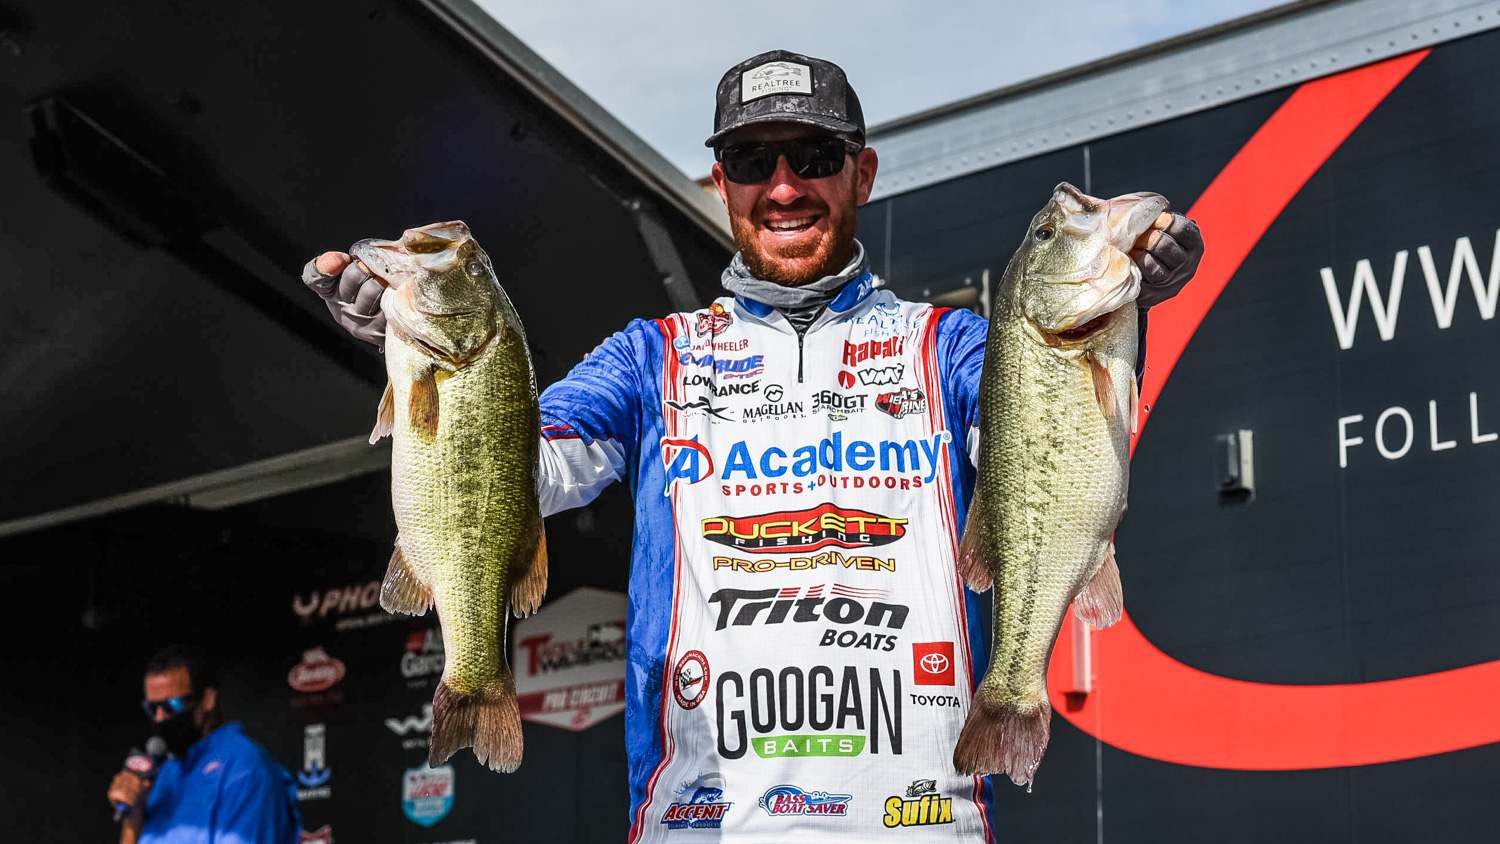 Wheeler leads with 24-9 on Chick - Major League Fishing